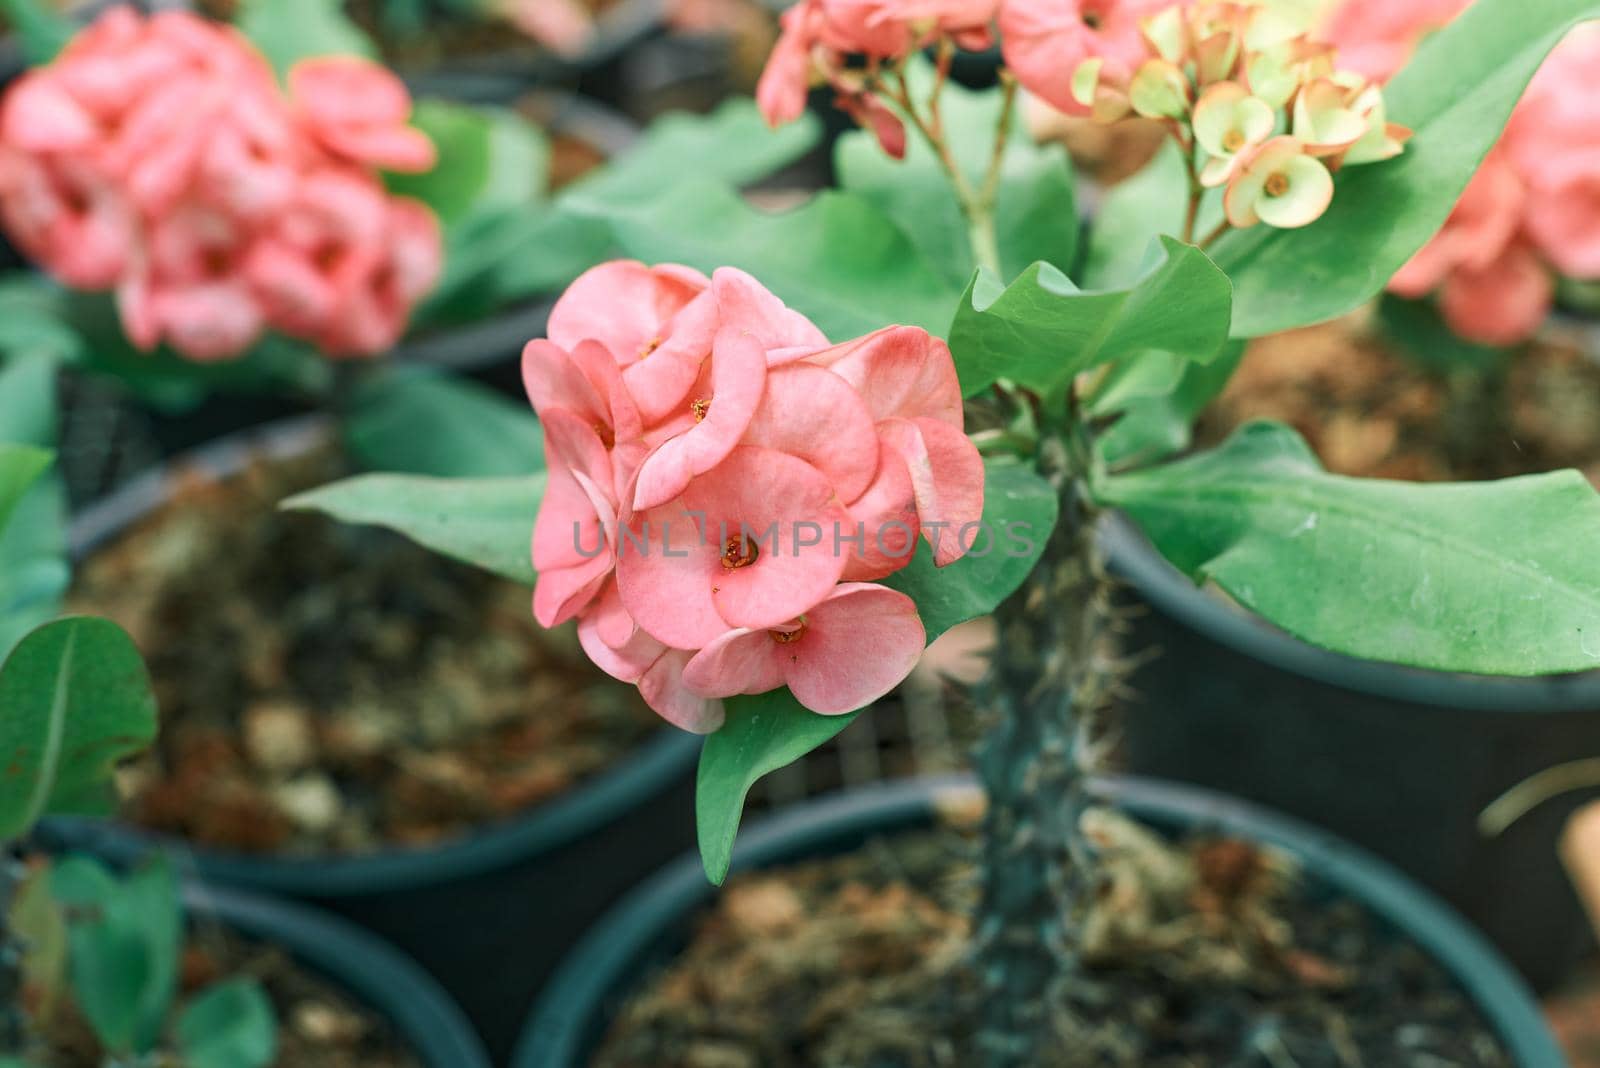 Pink Euphorbia Spurges flowers Gardening plants for small business Lucky petals by XGroup